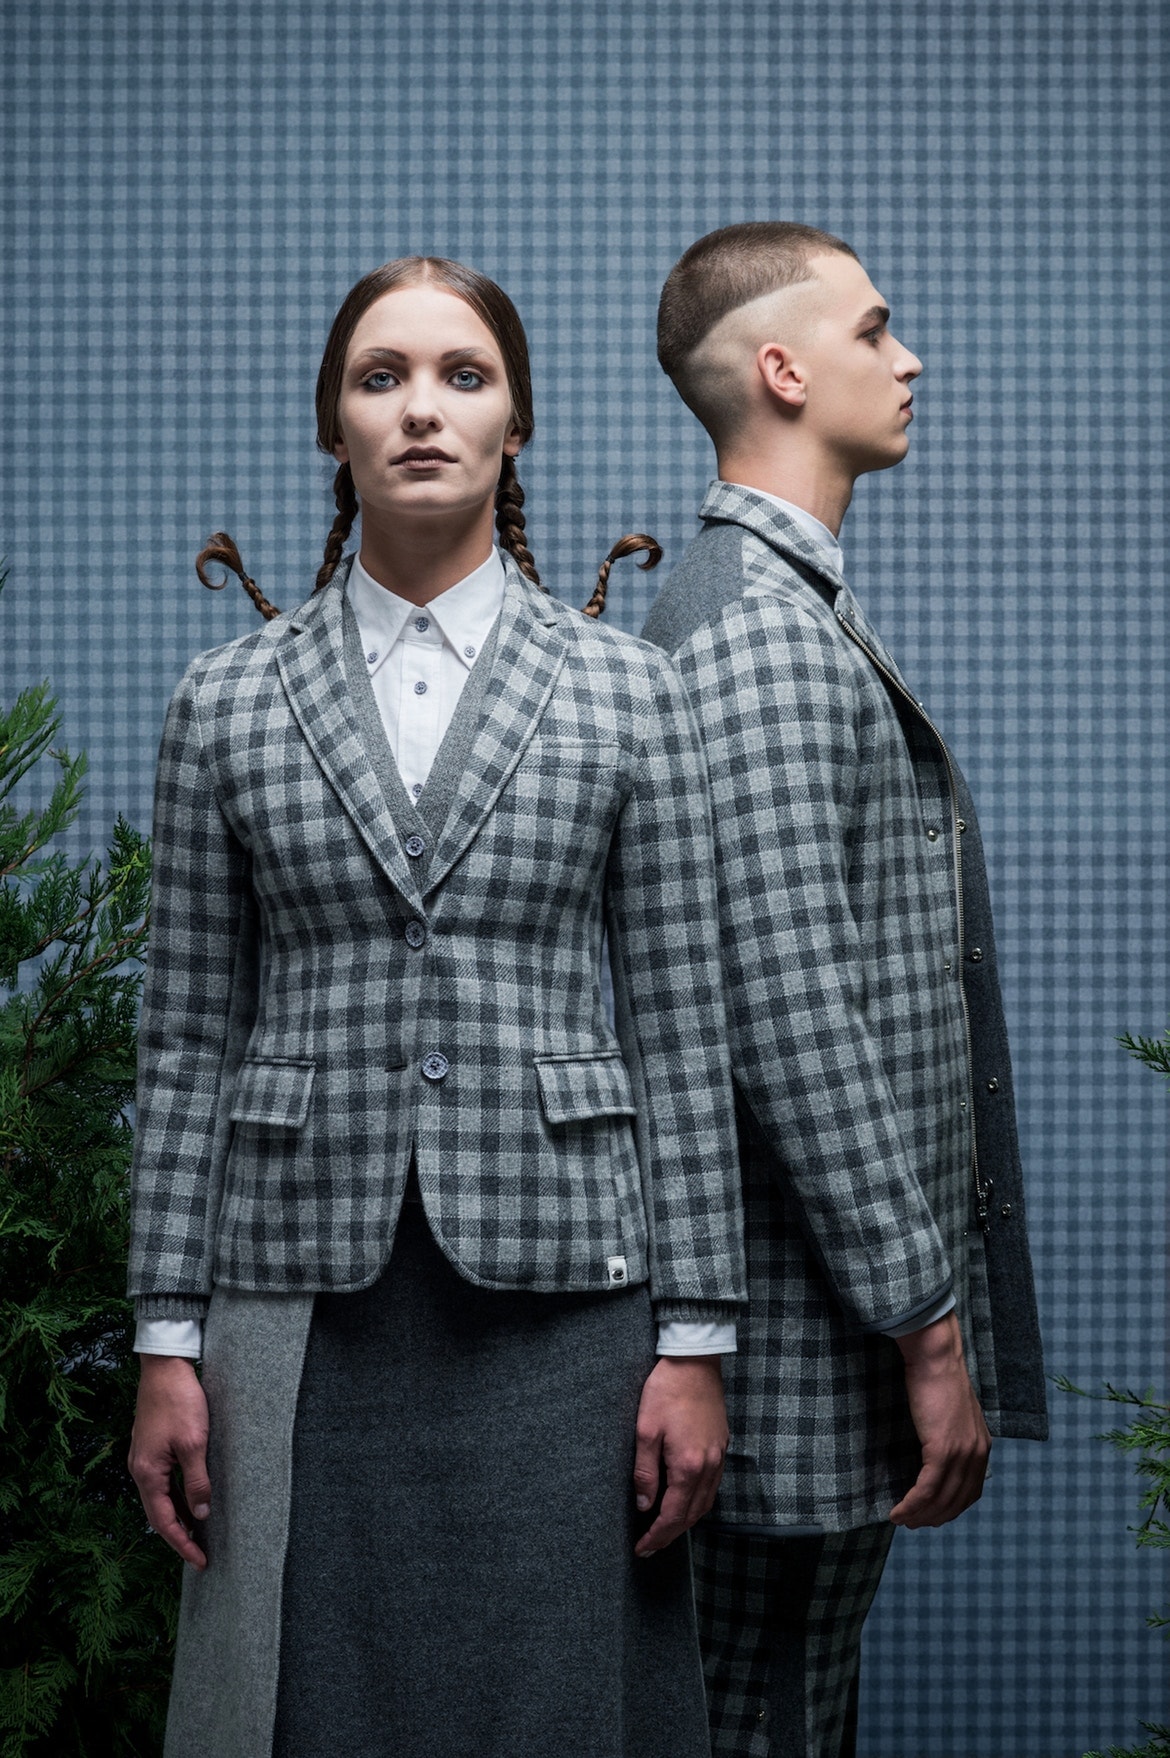 KOE Thom Browne Fall Winter 2017 Collection Collaboration Grey Gray October 19 2017 Release Info Date Details Drops